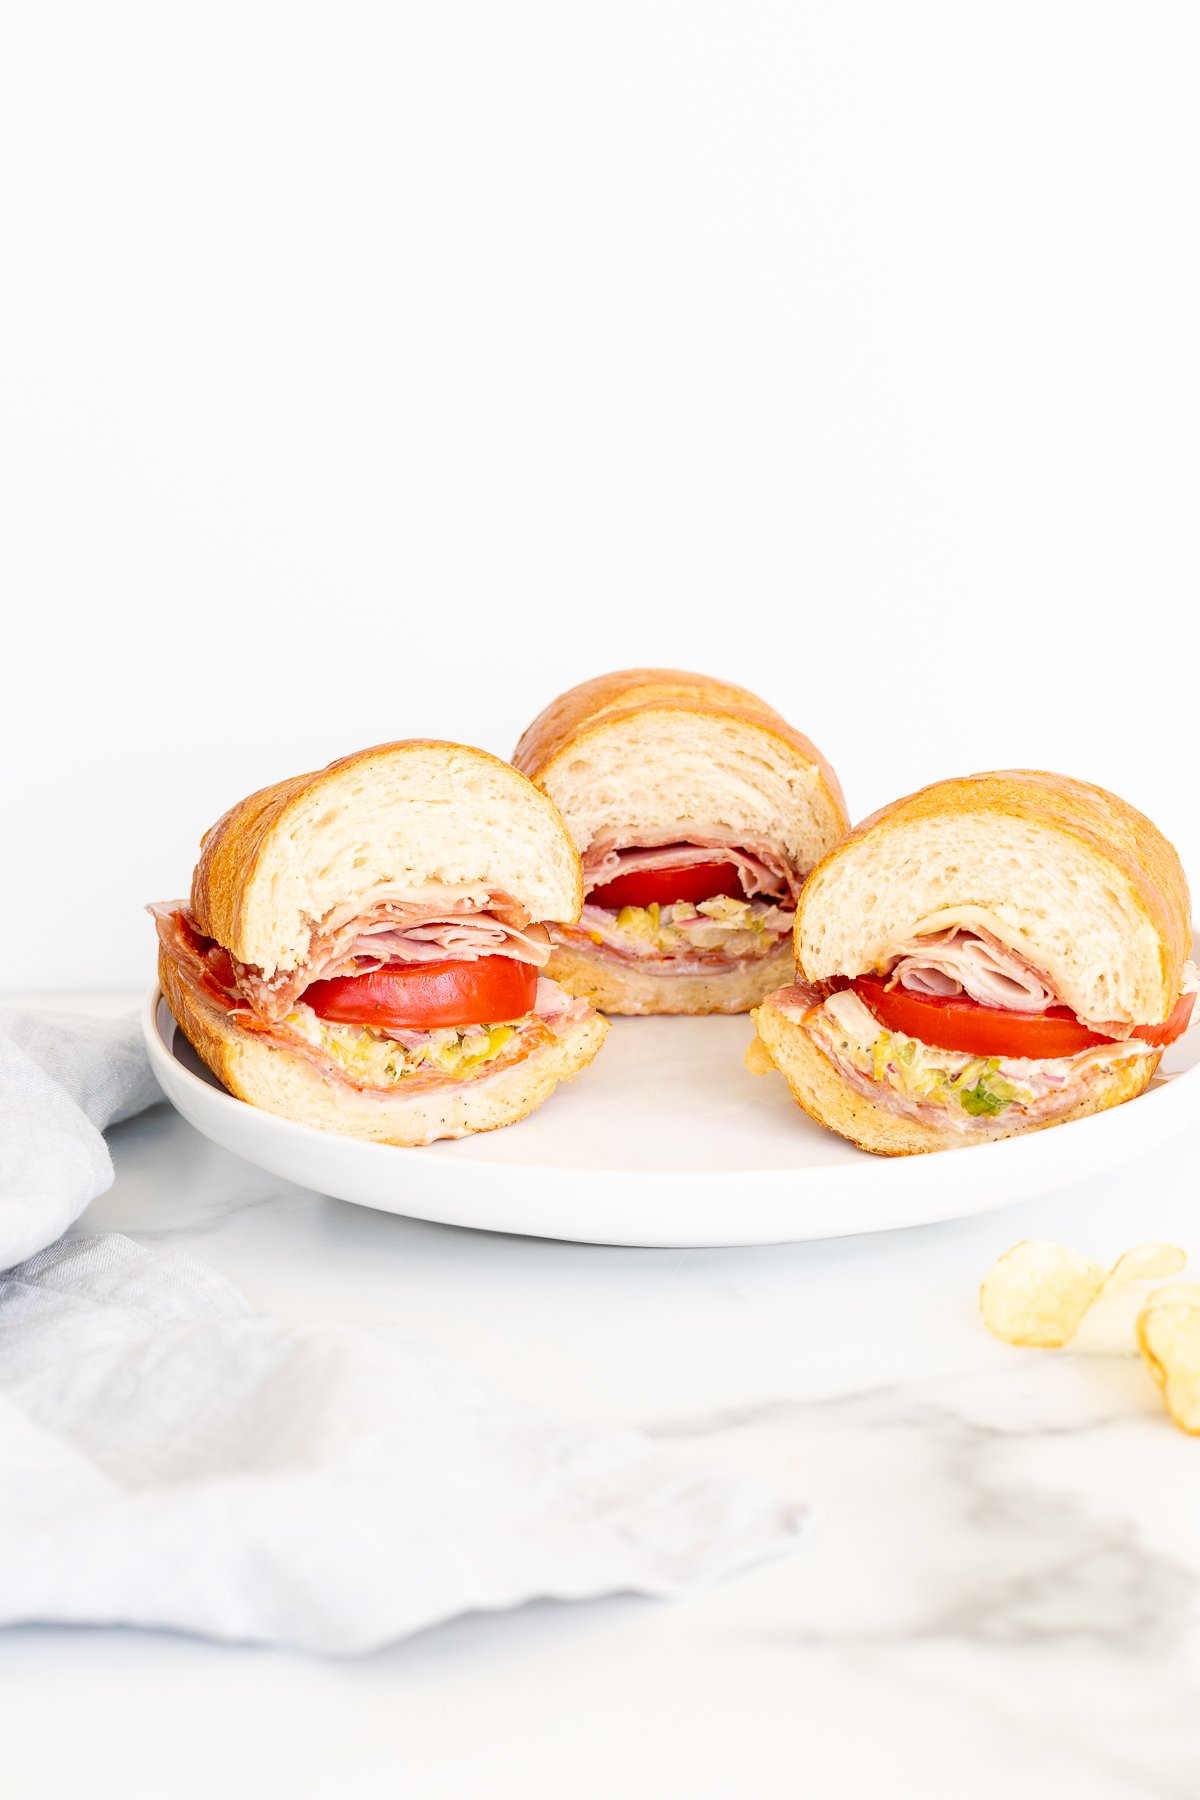 Three grinder sandwiches on a white plate.